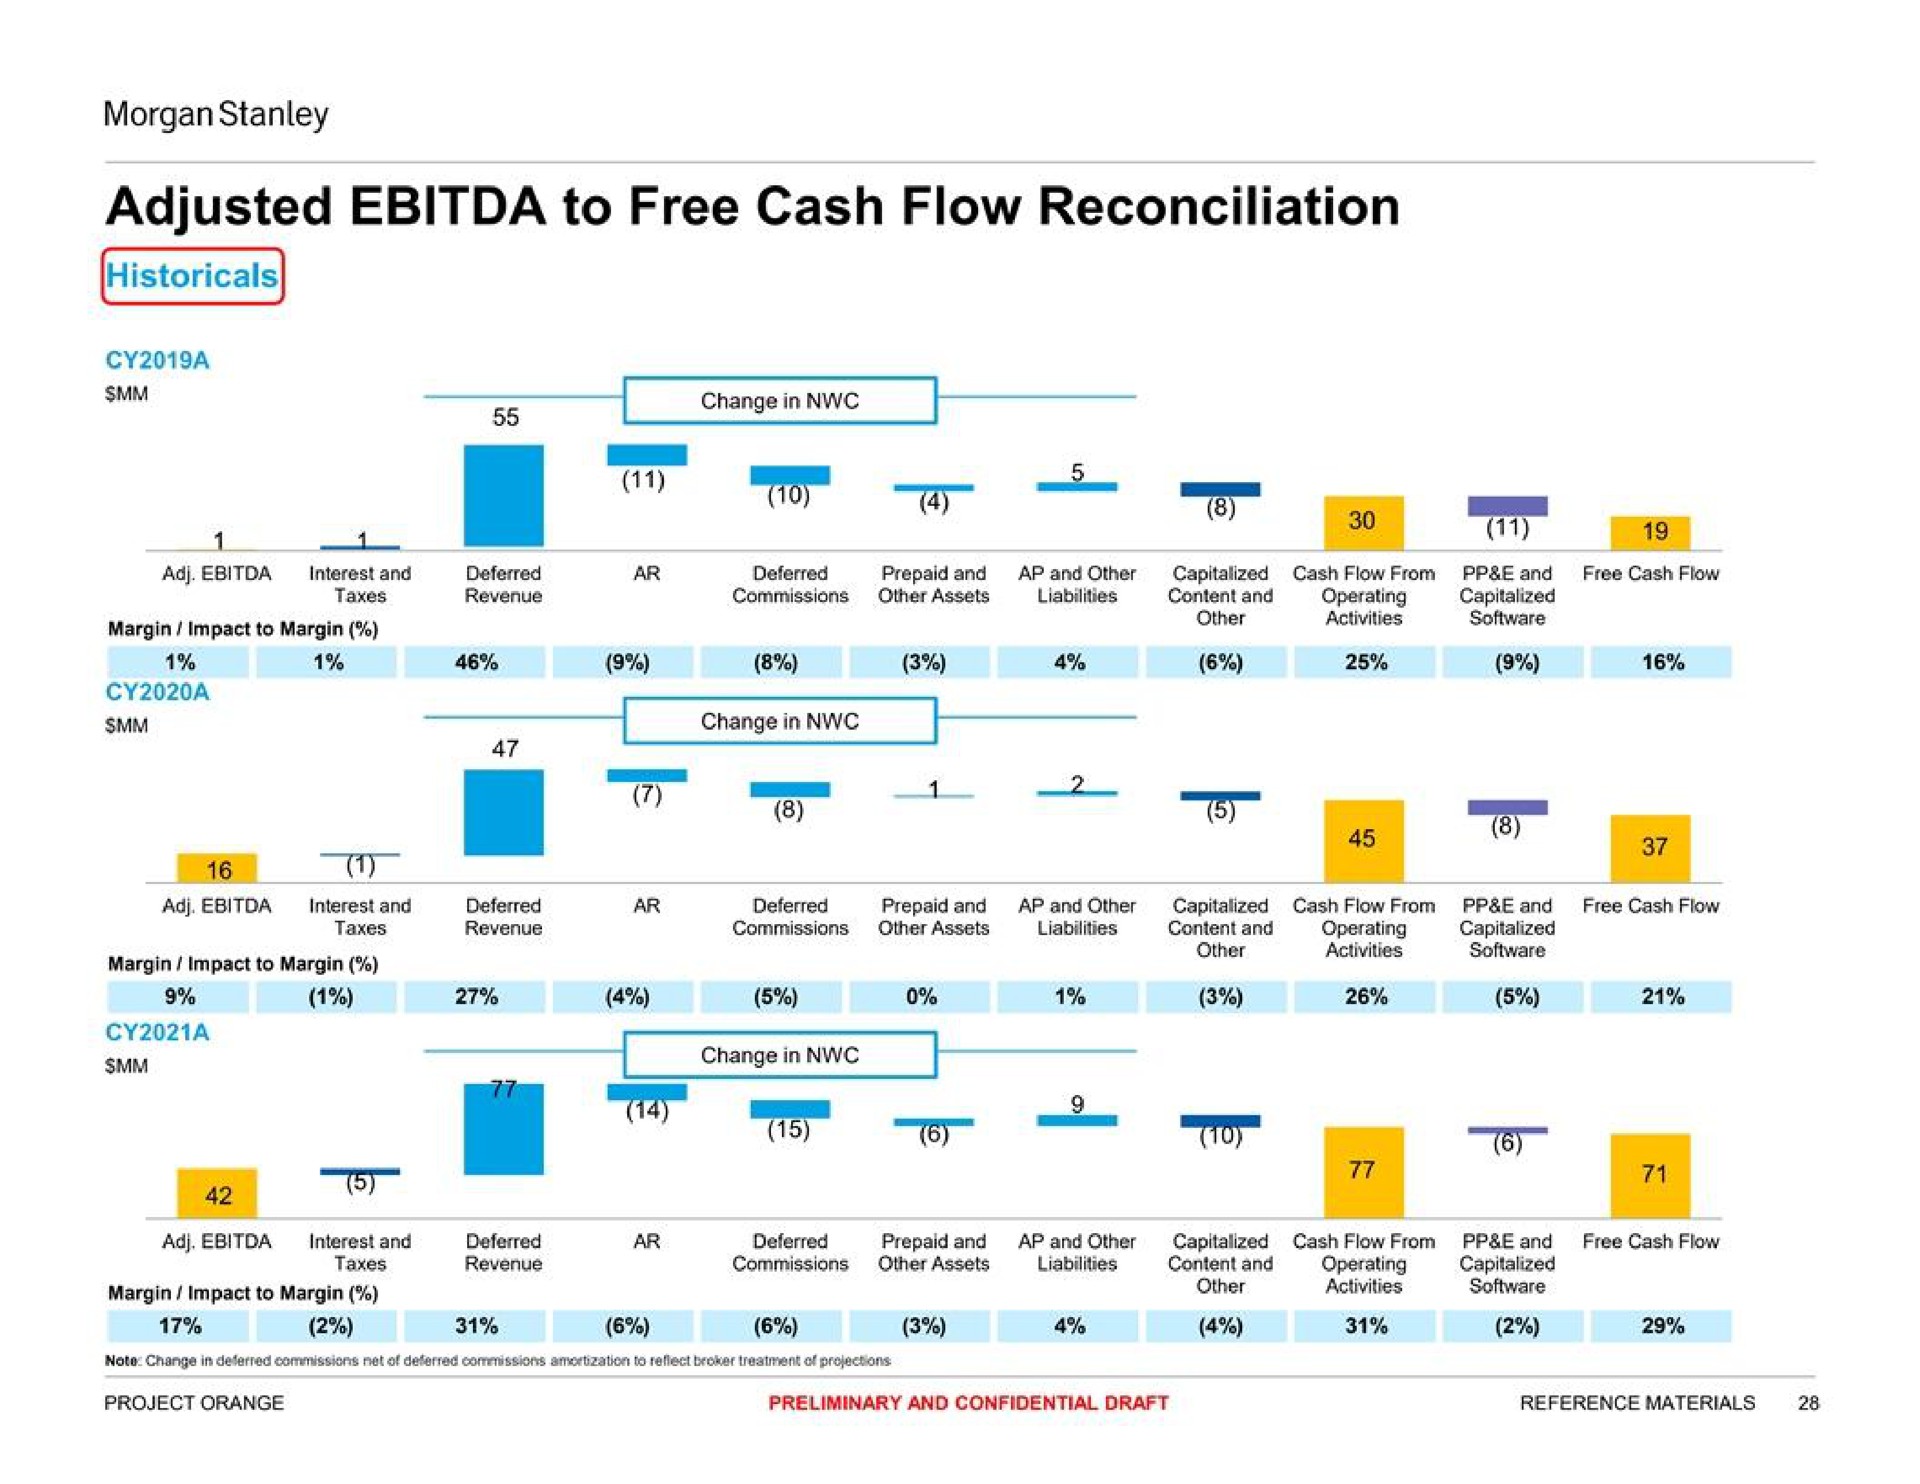 adjusted to free cash flow reconciliation a i to | Morgan Stanley